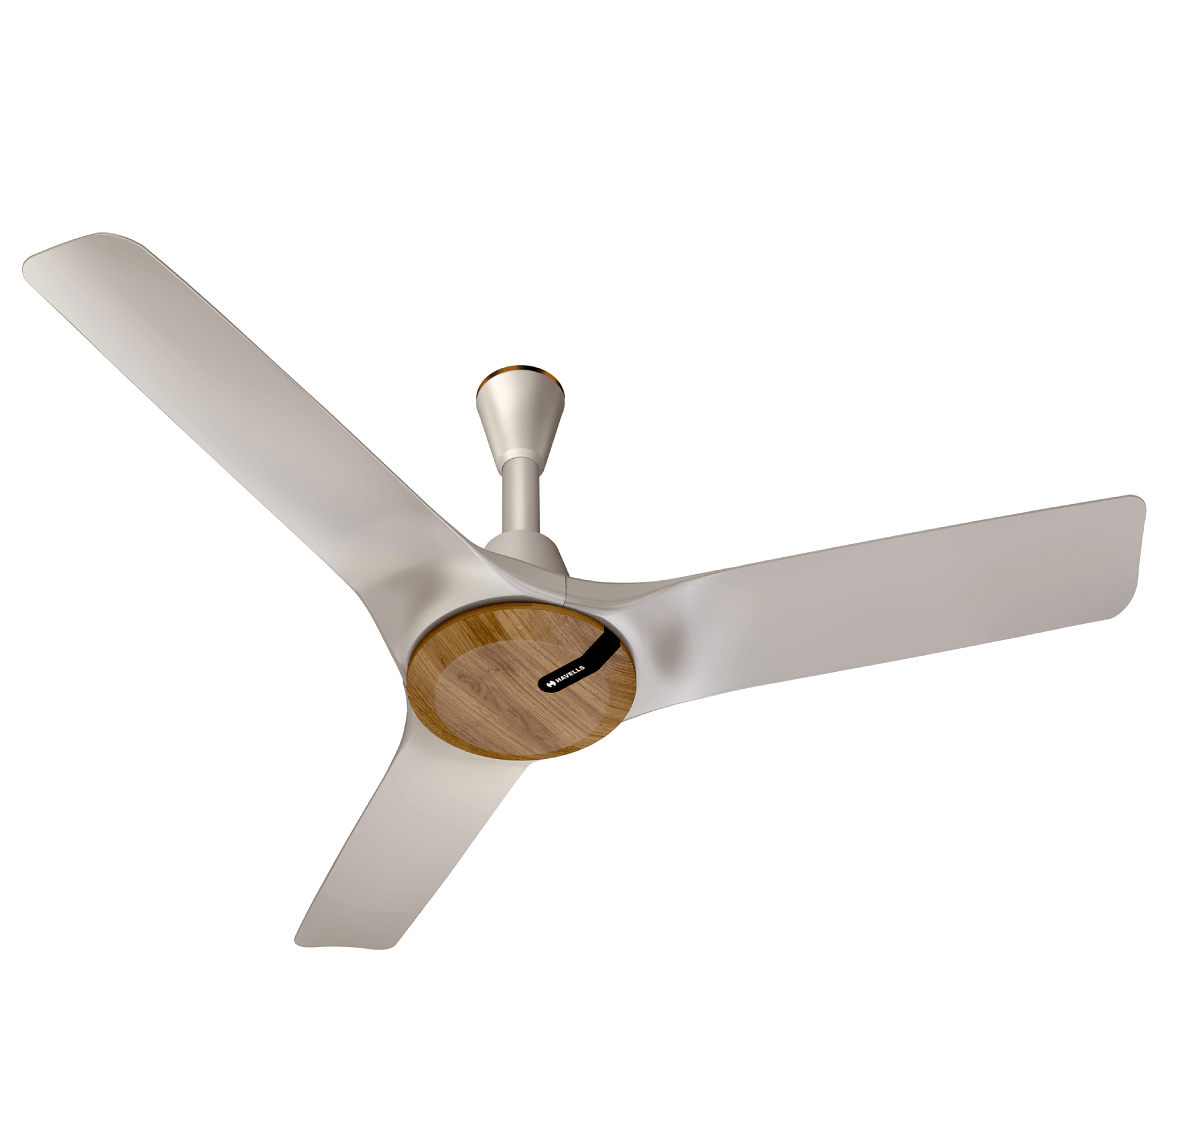 BLDC Fan: A Comprehensive Guide to Havells Stealth Neo BLDC Wood Mist  Ceiling Fan | by Havells India | Medium